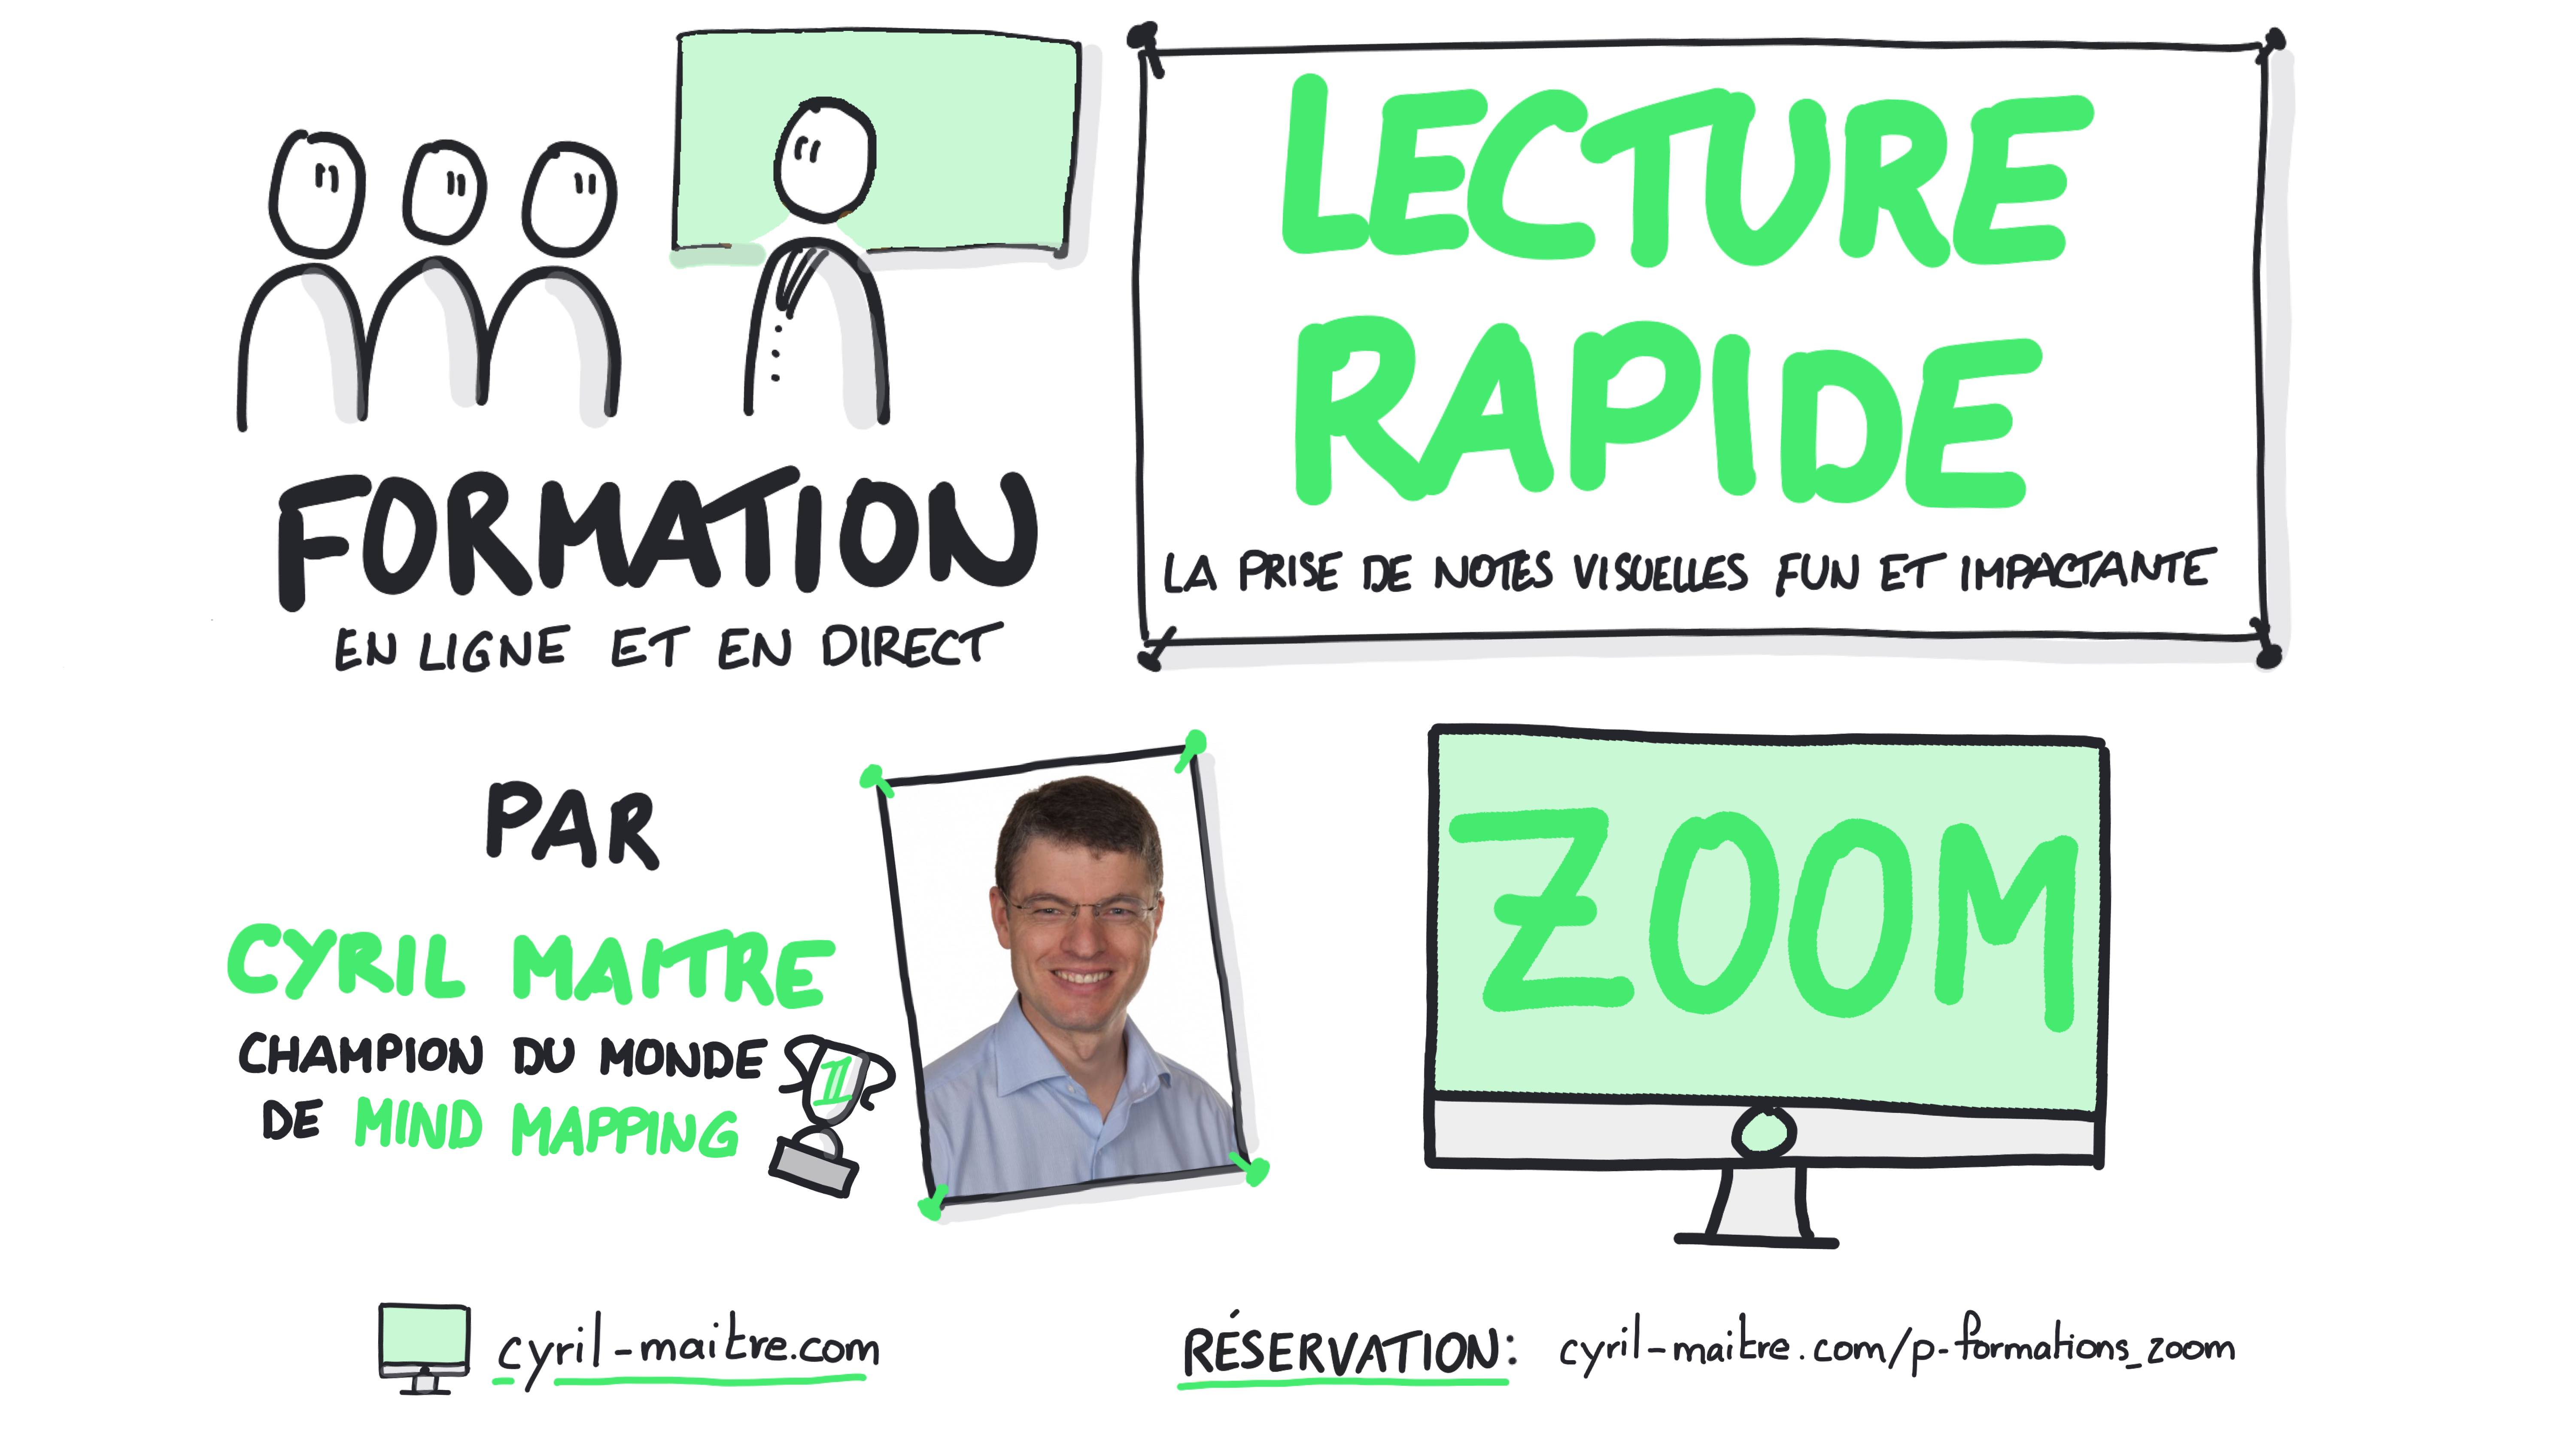 Formation lecture efficace